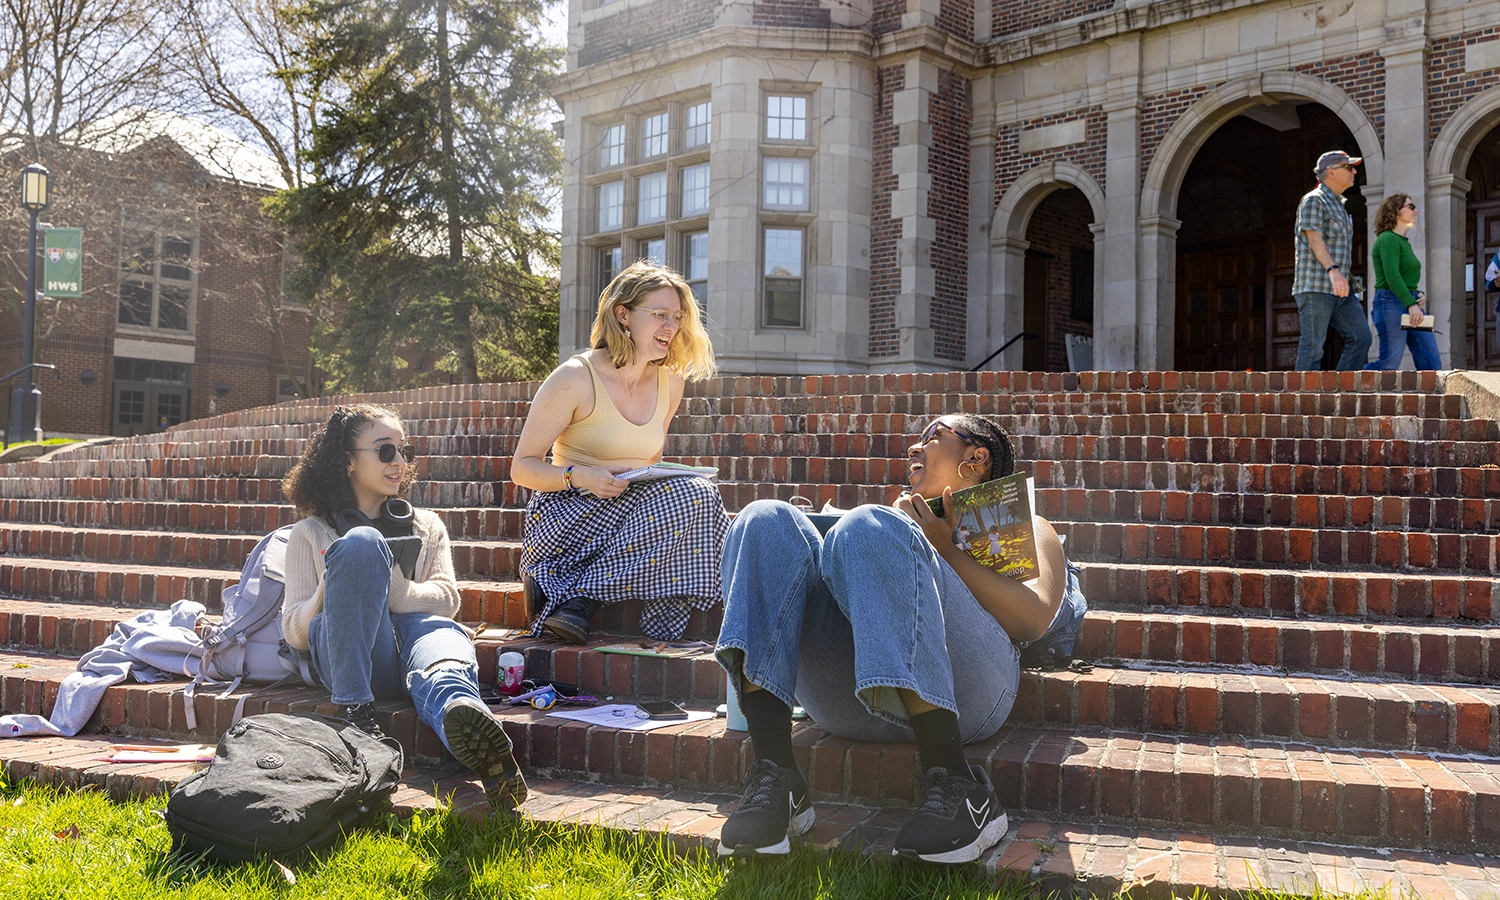 Maria Galarza ’26, Elizabeth Legg ’26 and Faith Okoli ’26 share a laugh while studying on the steps of Coxe Hall.